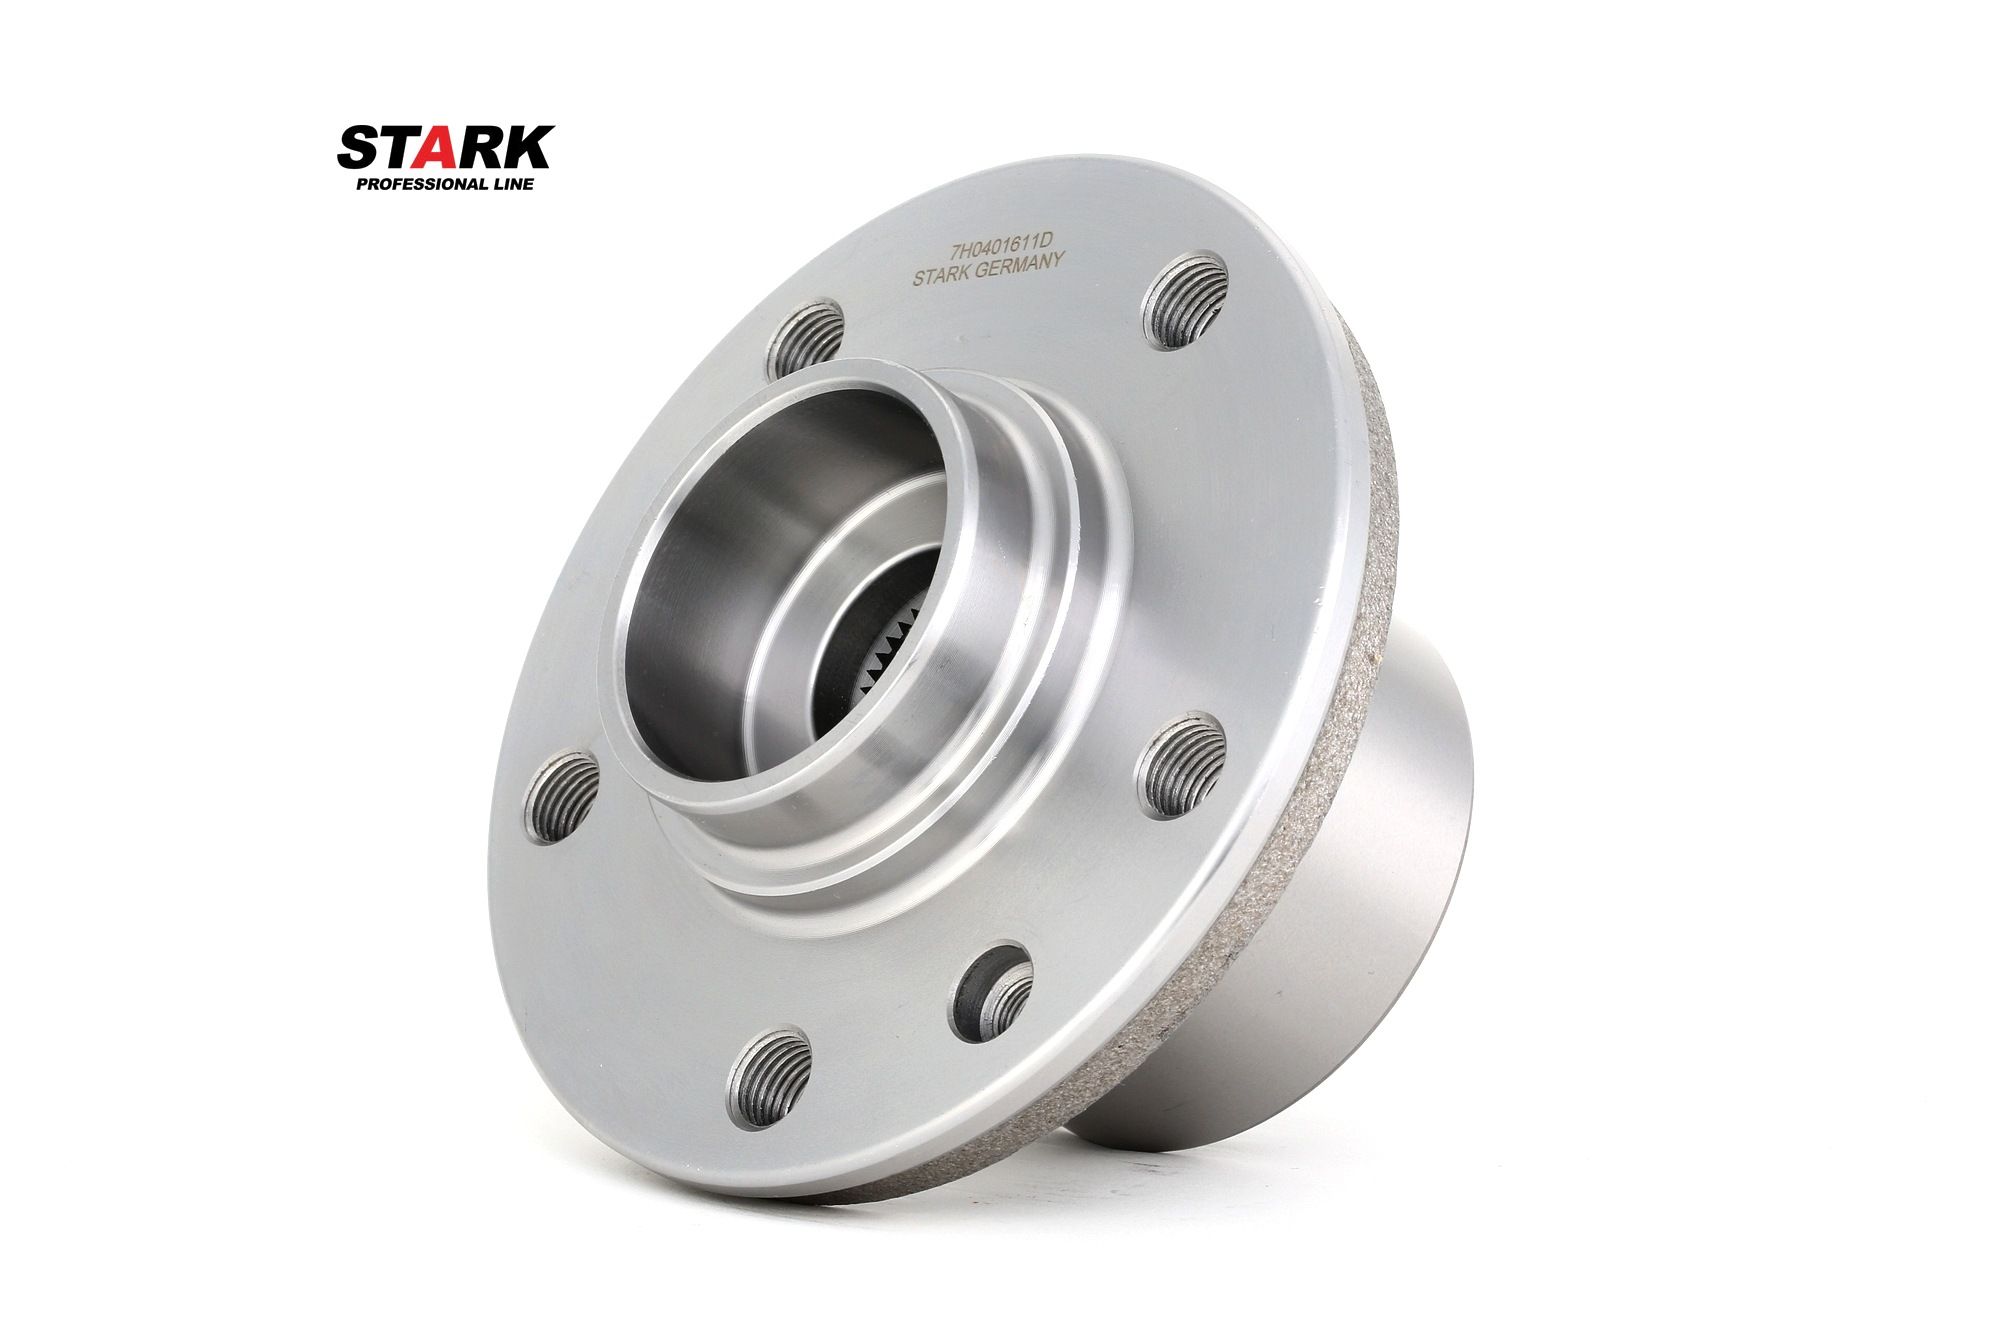 SKWB-0180128 STARK Wheel hub assembly DAIHATSU with attachment material, with integrated wheel bearing, with wheel hub, 85 mm, Ball Bearing, Tapered Roller Bearing